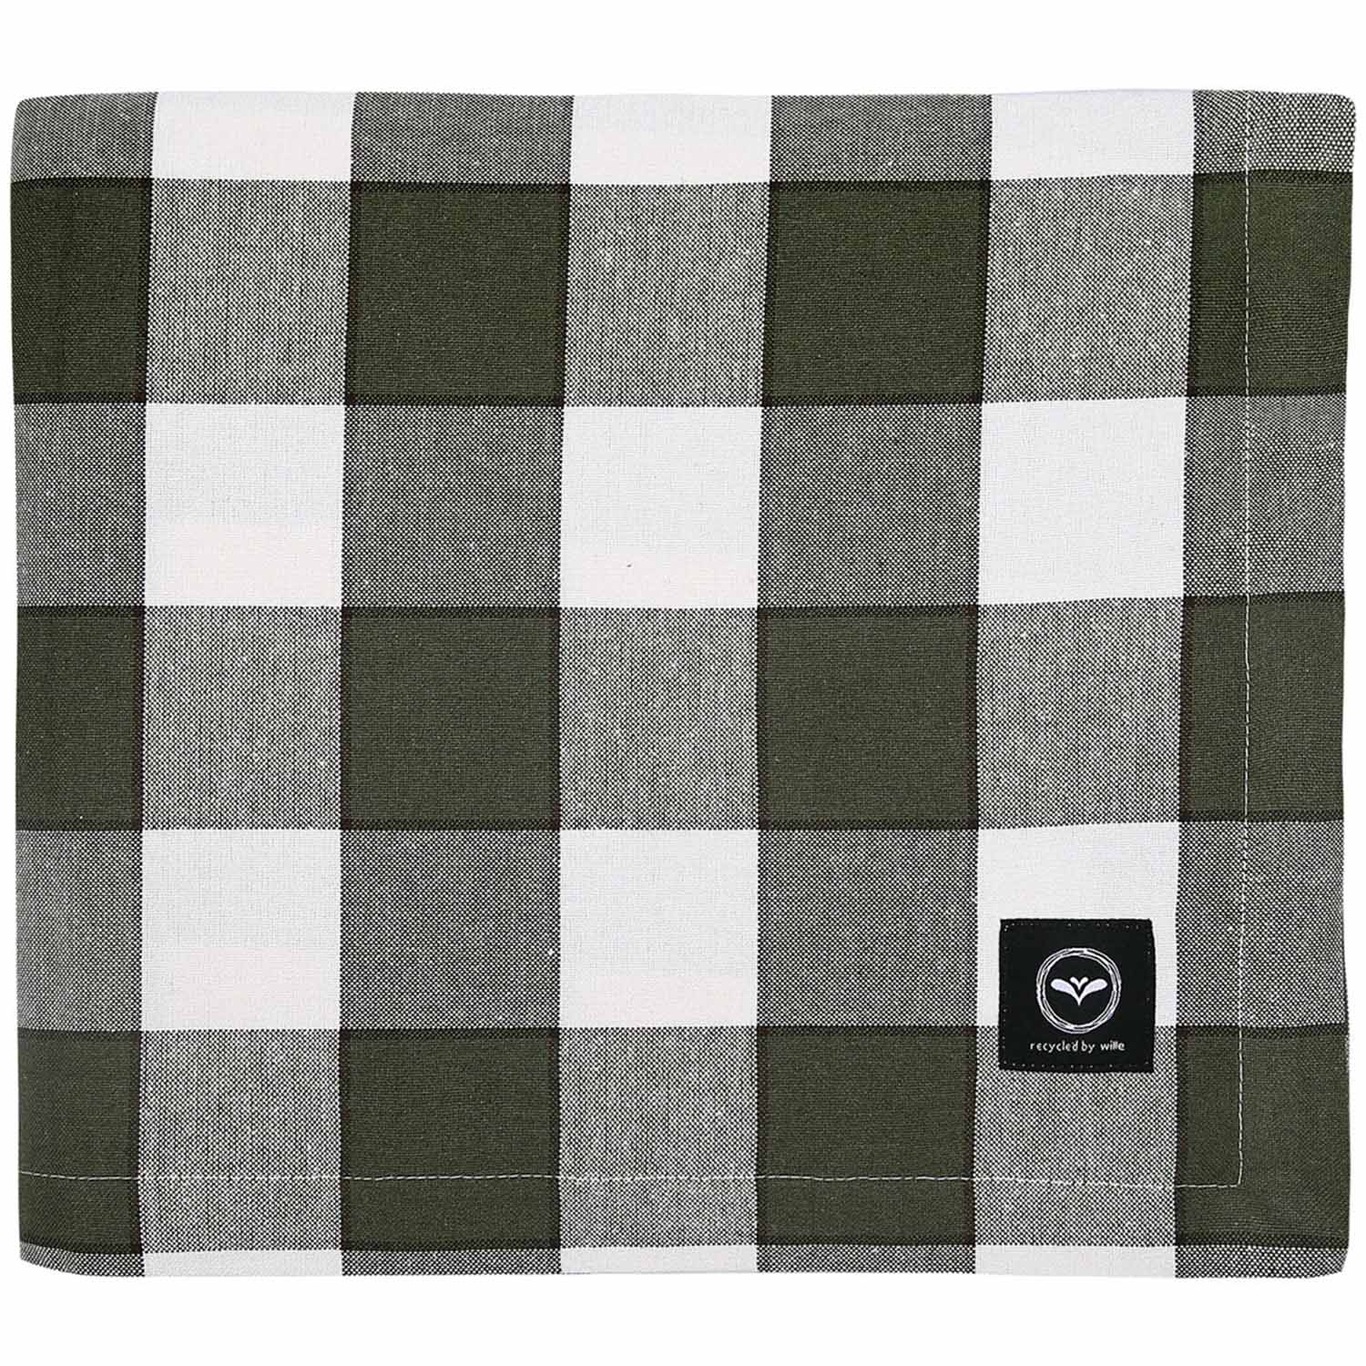 Ted Tablecloth 140x250 cm, Olive Green